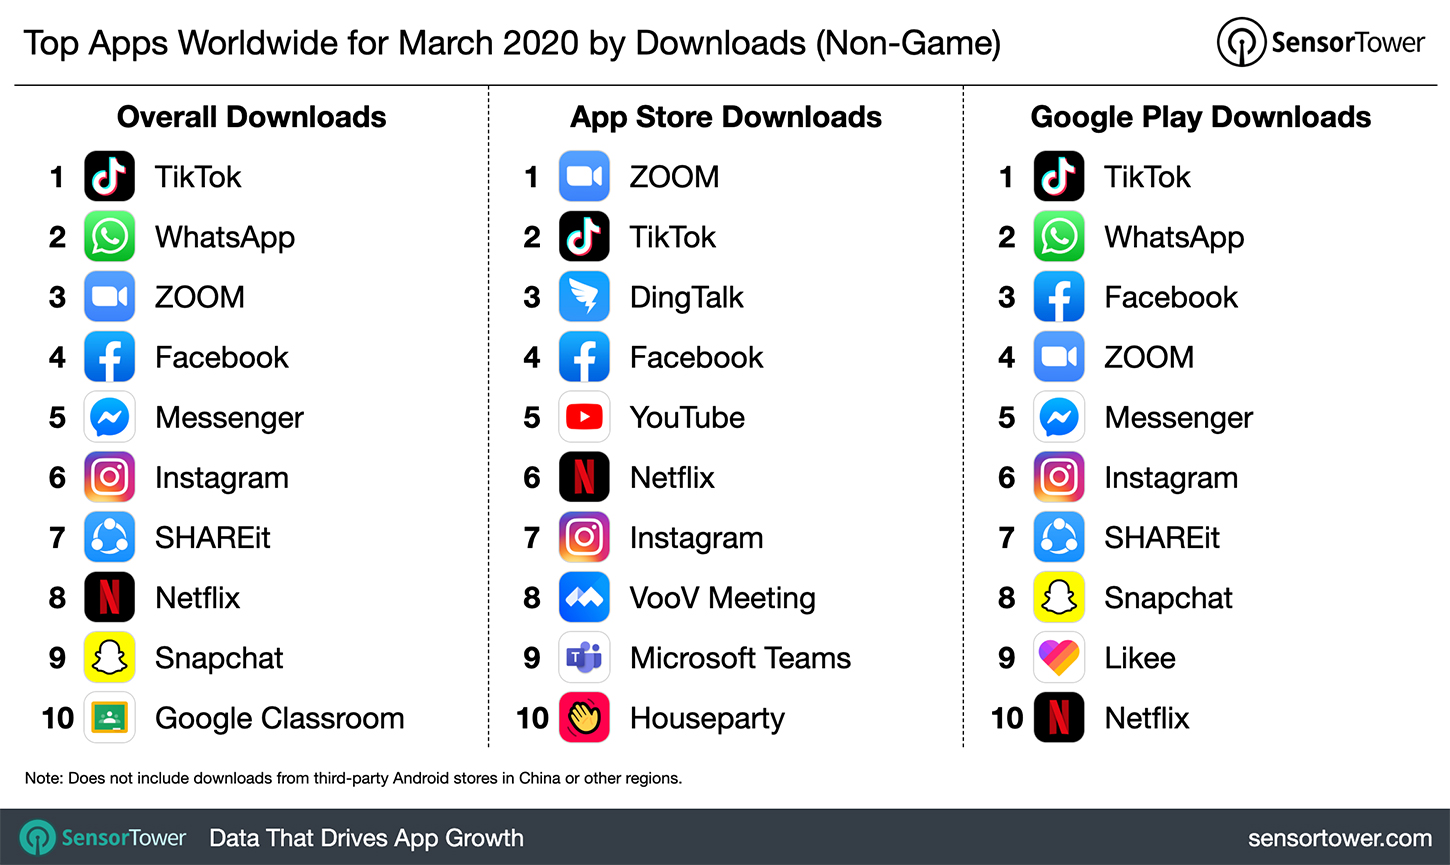 Top Apps Worldwide for March 2020 by Downloads